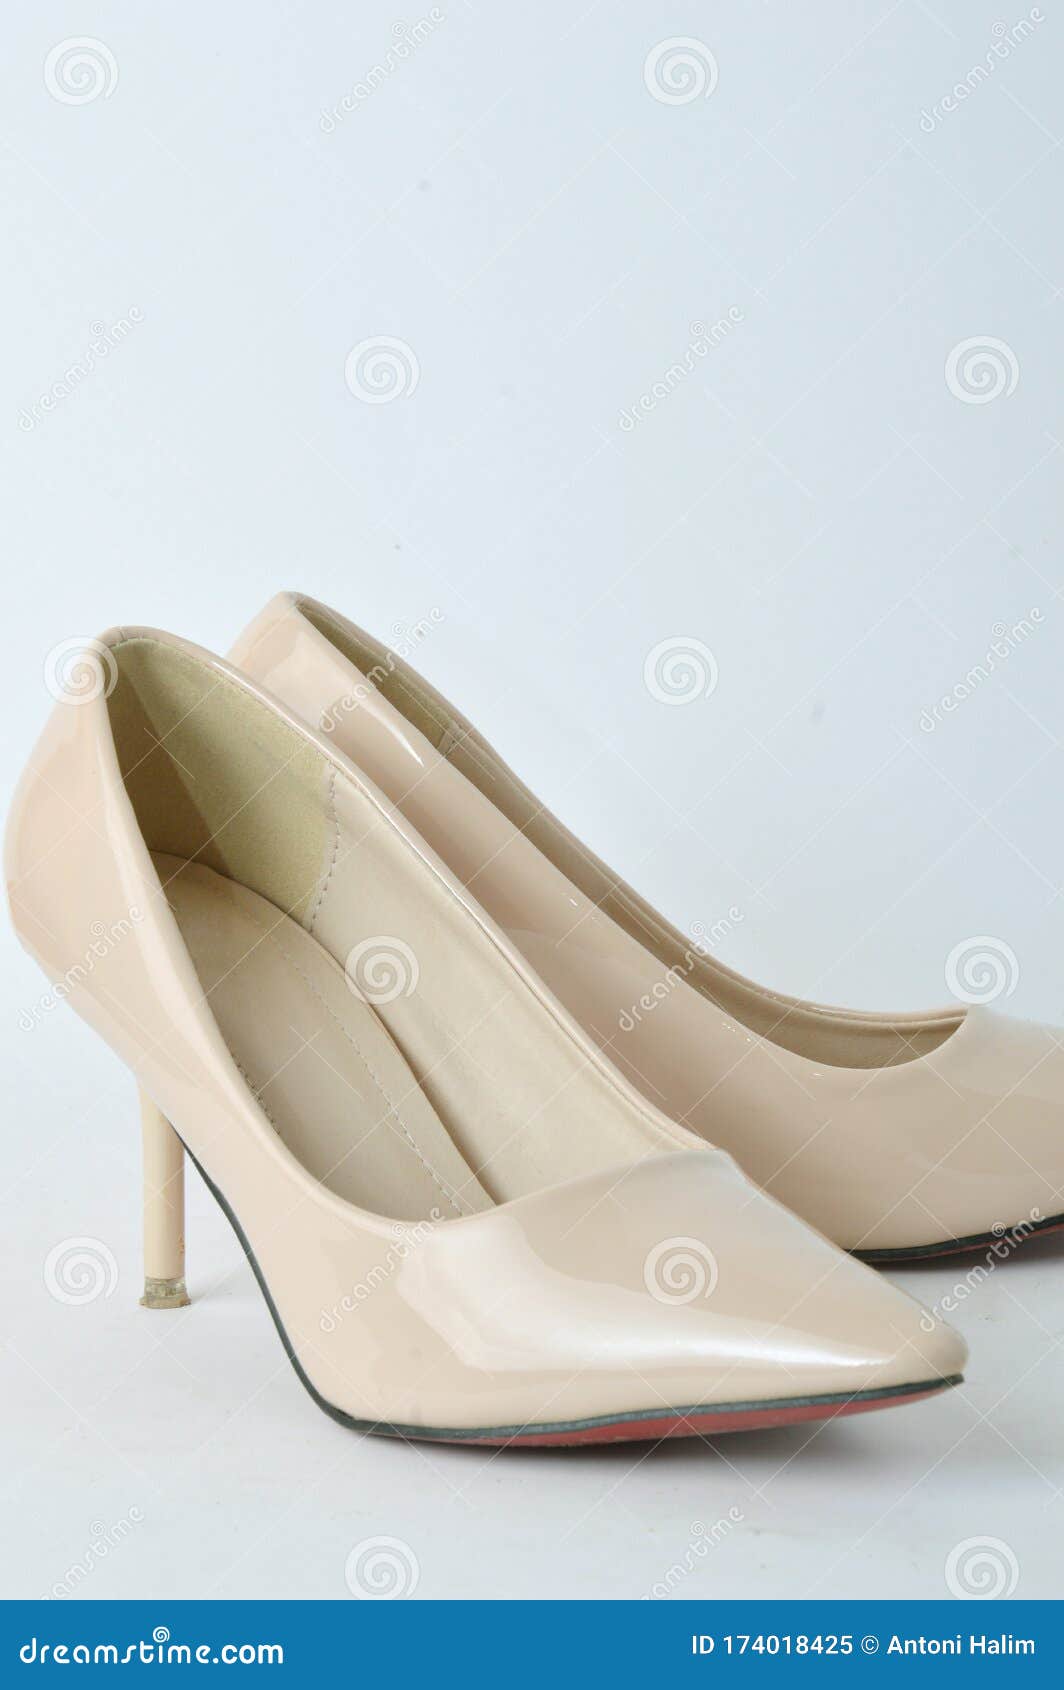 High heel shoes stock image. Image of foot, attractive - 174018425